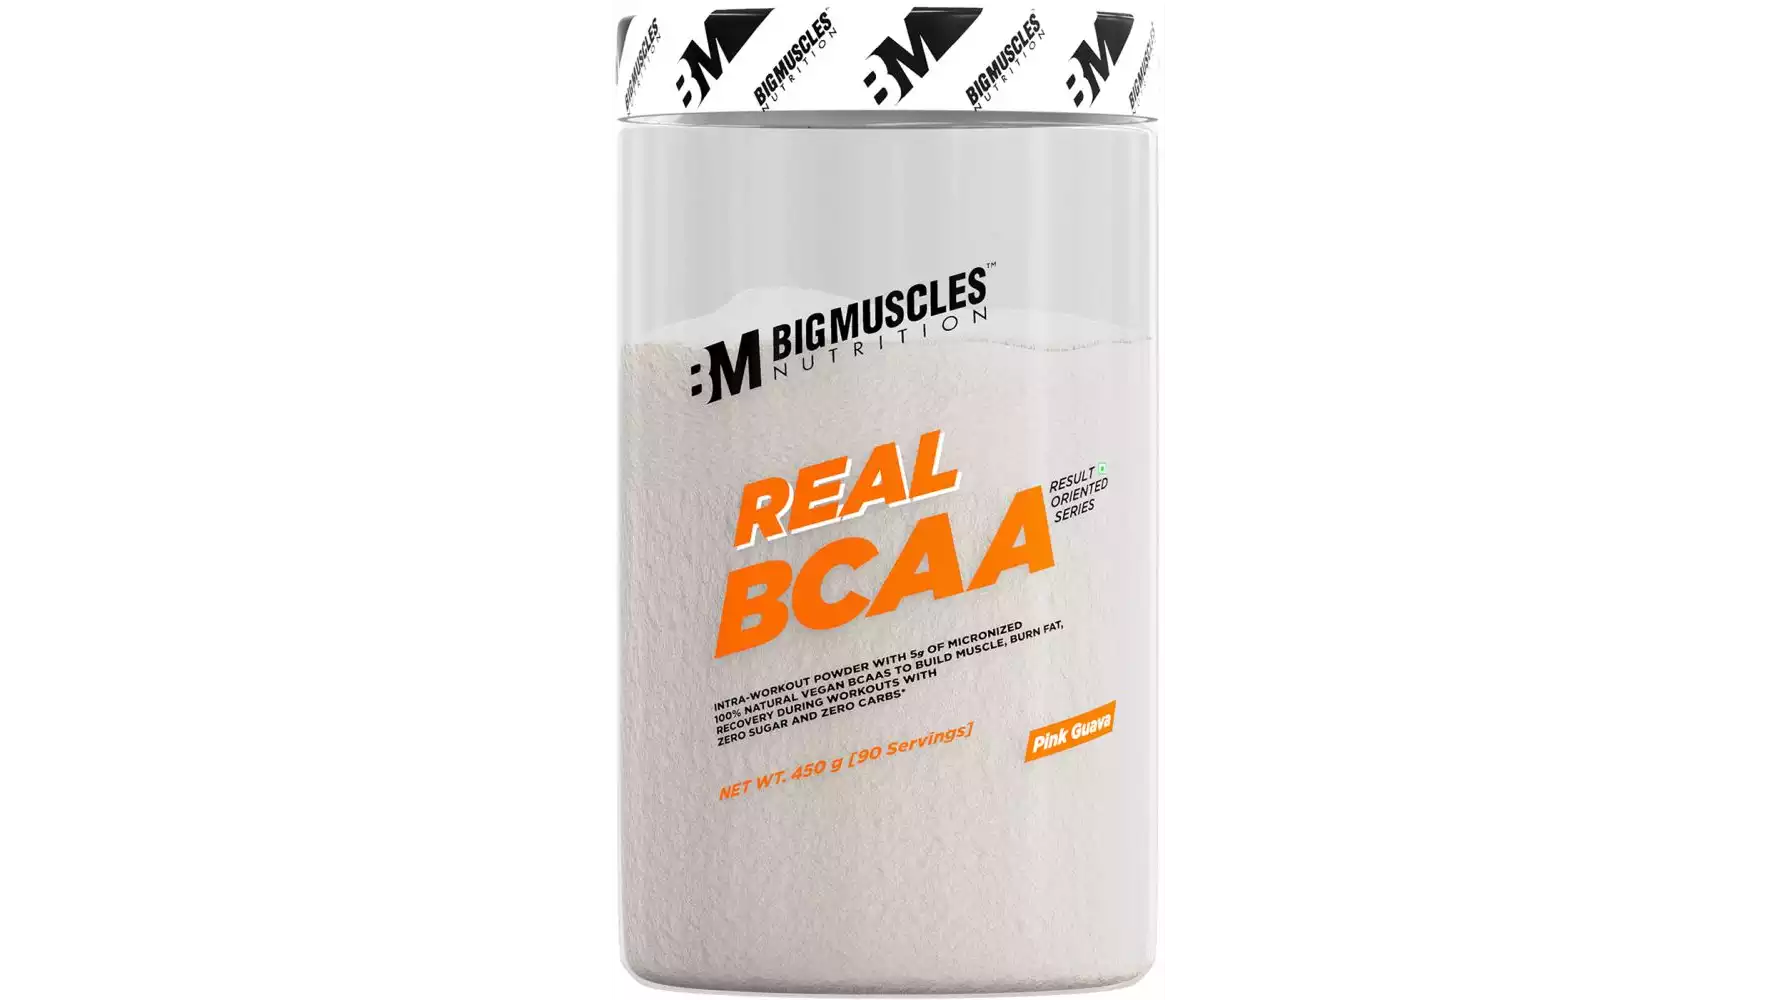 Bigmuscles Nutrition Real Bcaa 100% Micronized Vegan Muscle Recovery & Endurance Powder Pink Guava (450g)